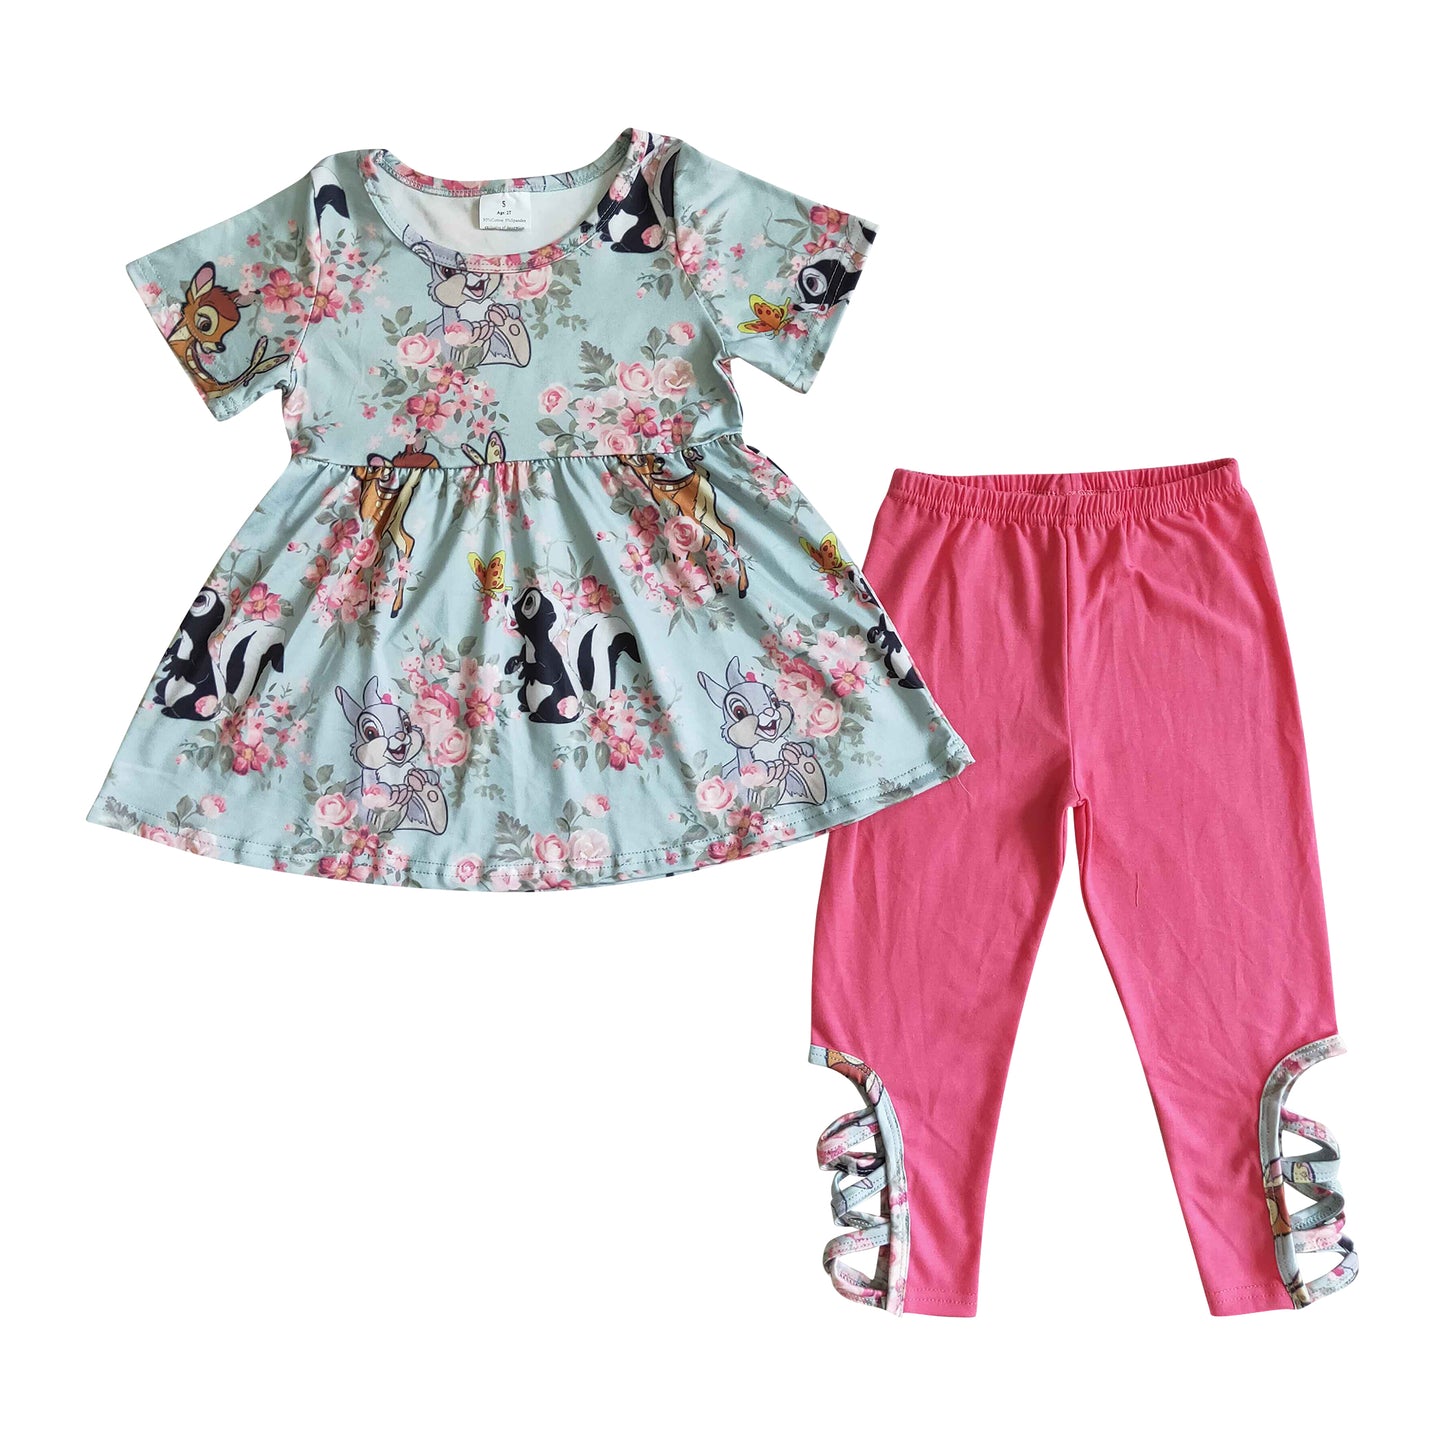 girl's clothes set animal floral pink leggings outfit